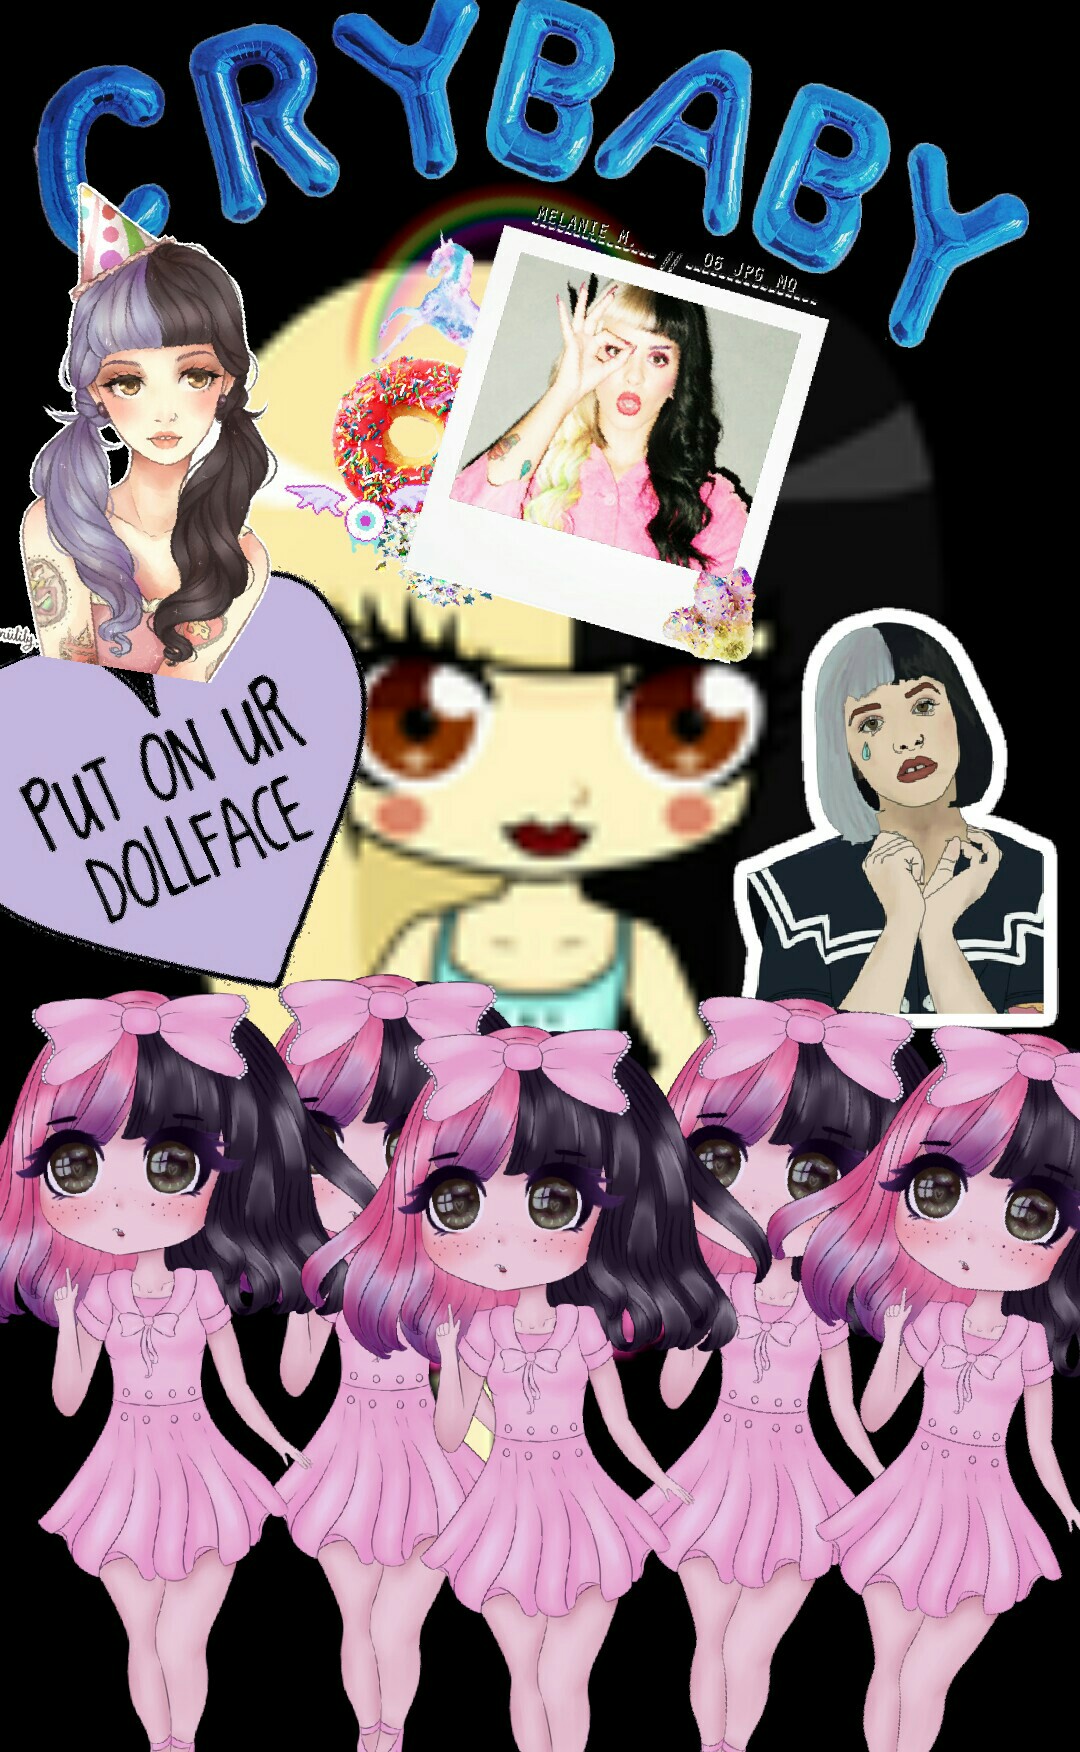 The new theme is Melanie Martinez. Sorry it took so long for me to Upload this, but I was busy Hope you enjoy .Later!